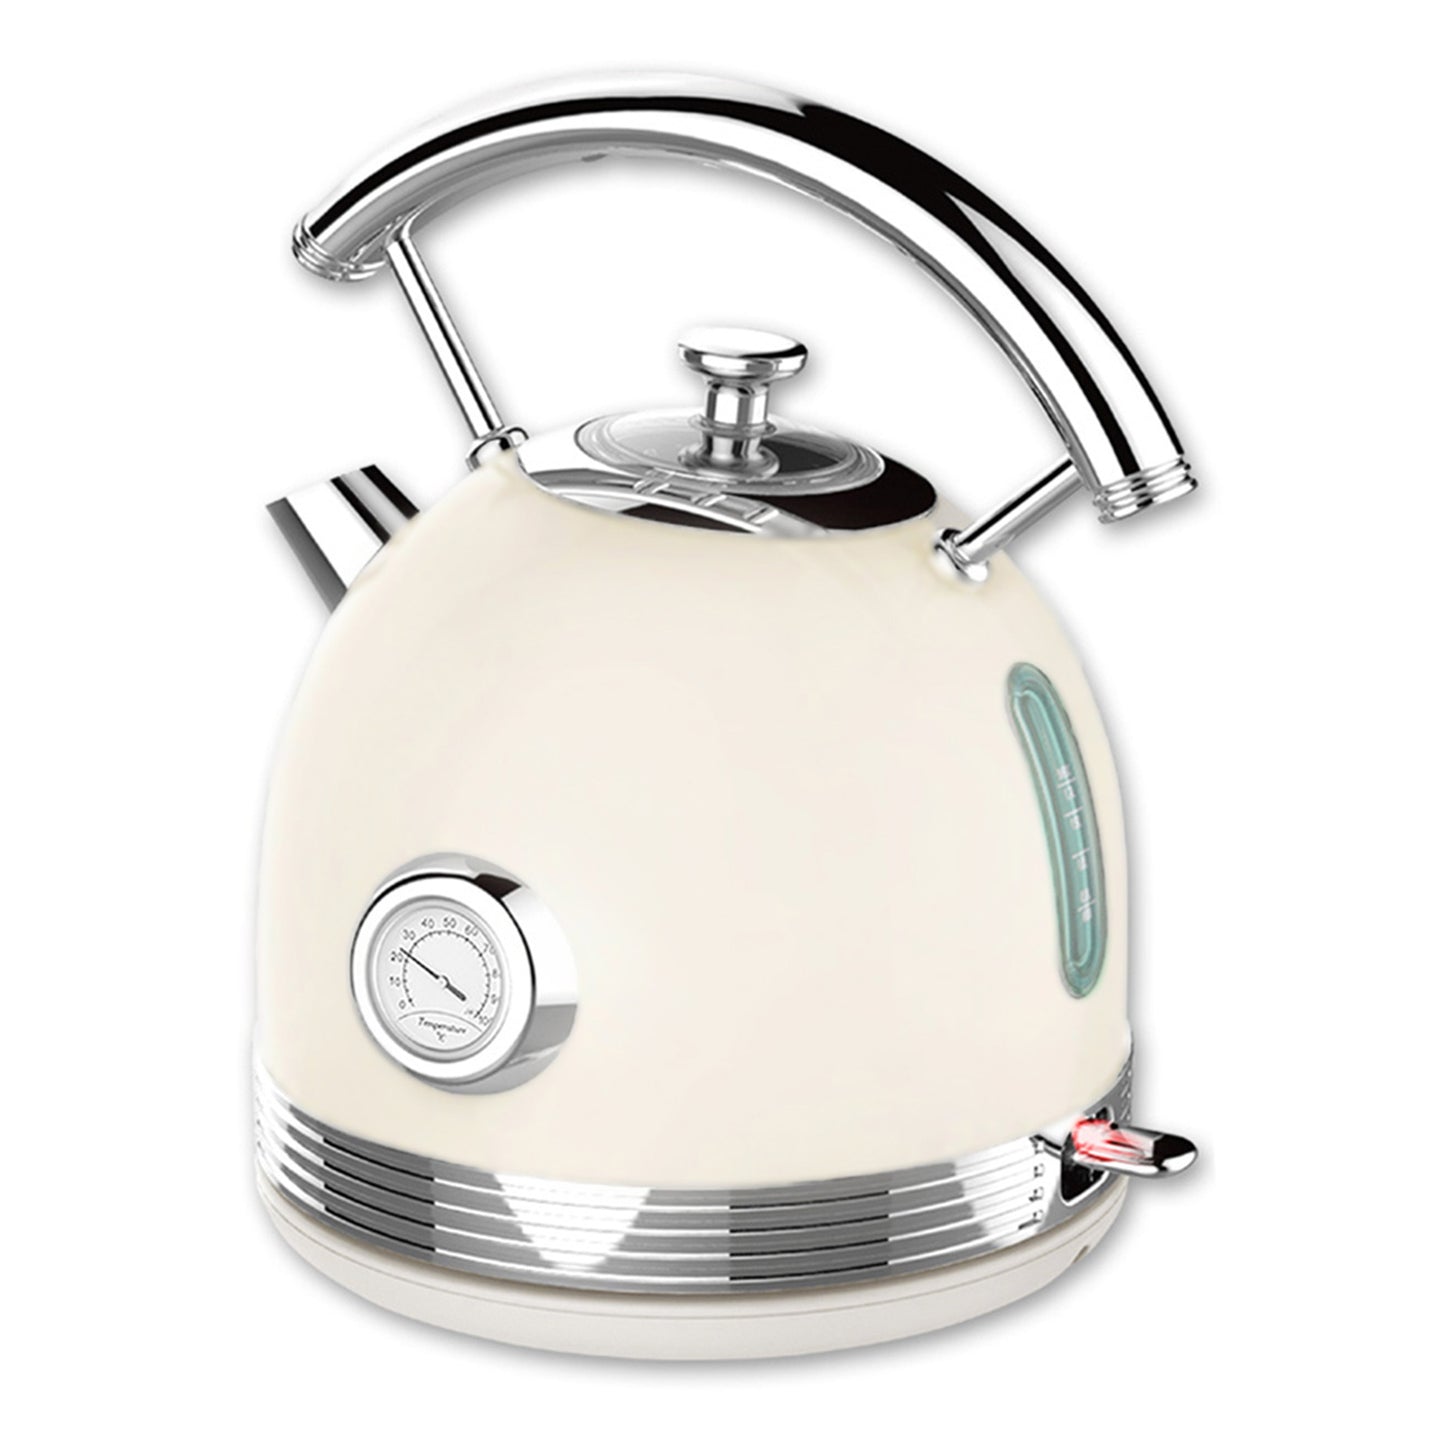 PHILEX 1.7 White Electric Kettle Boiler Stainless Steel Retro